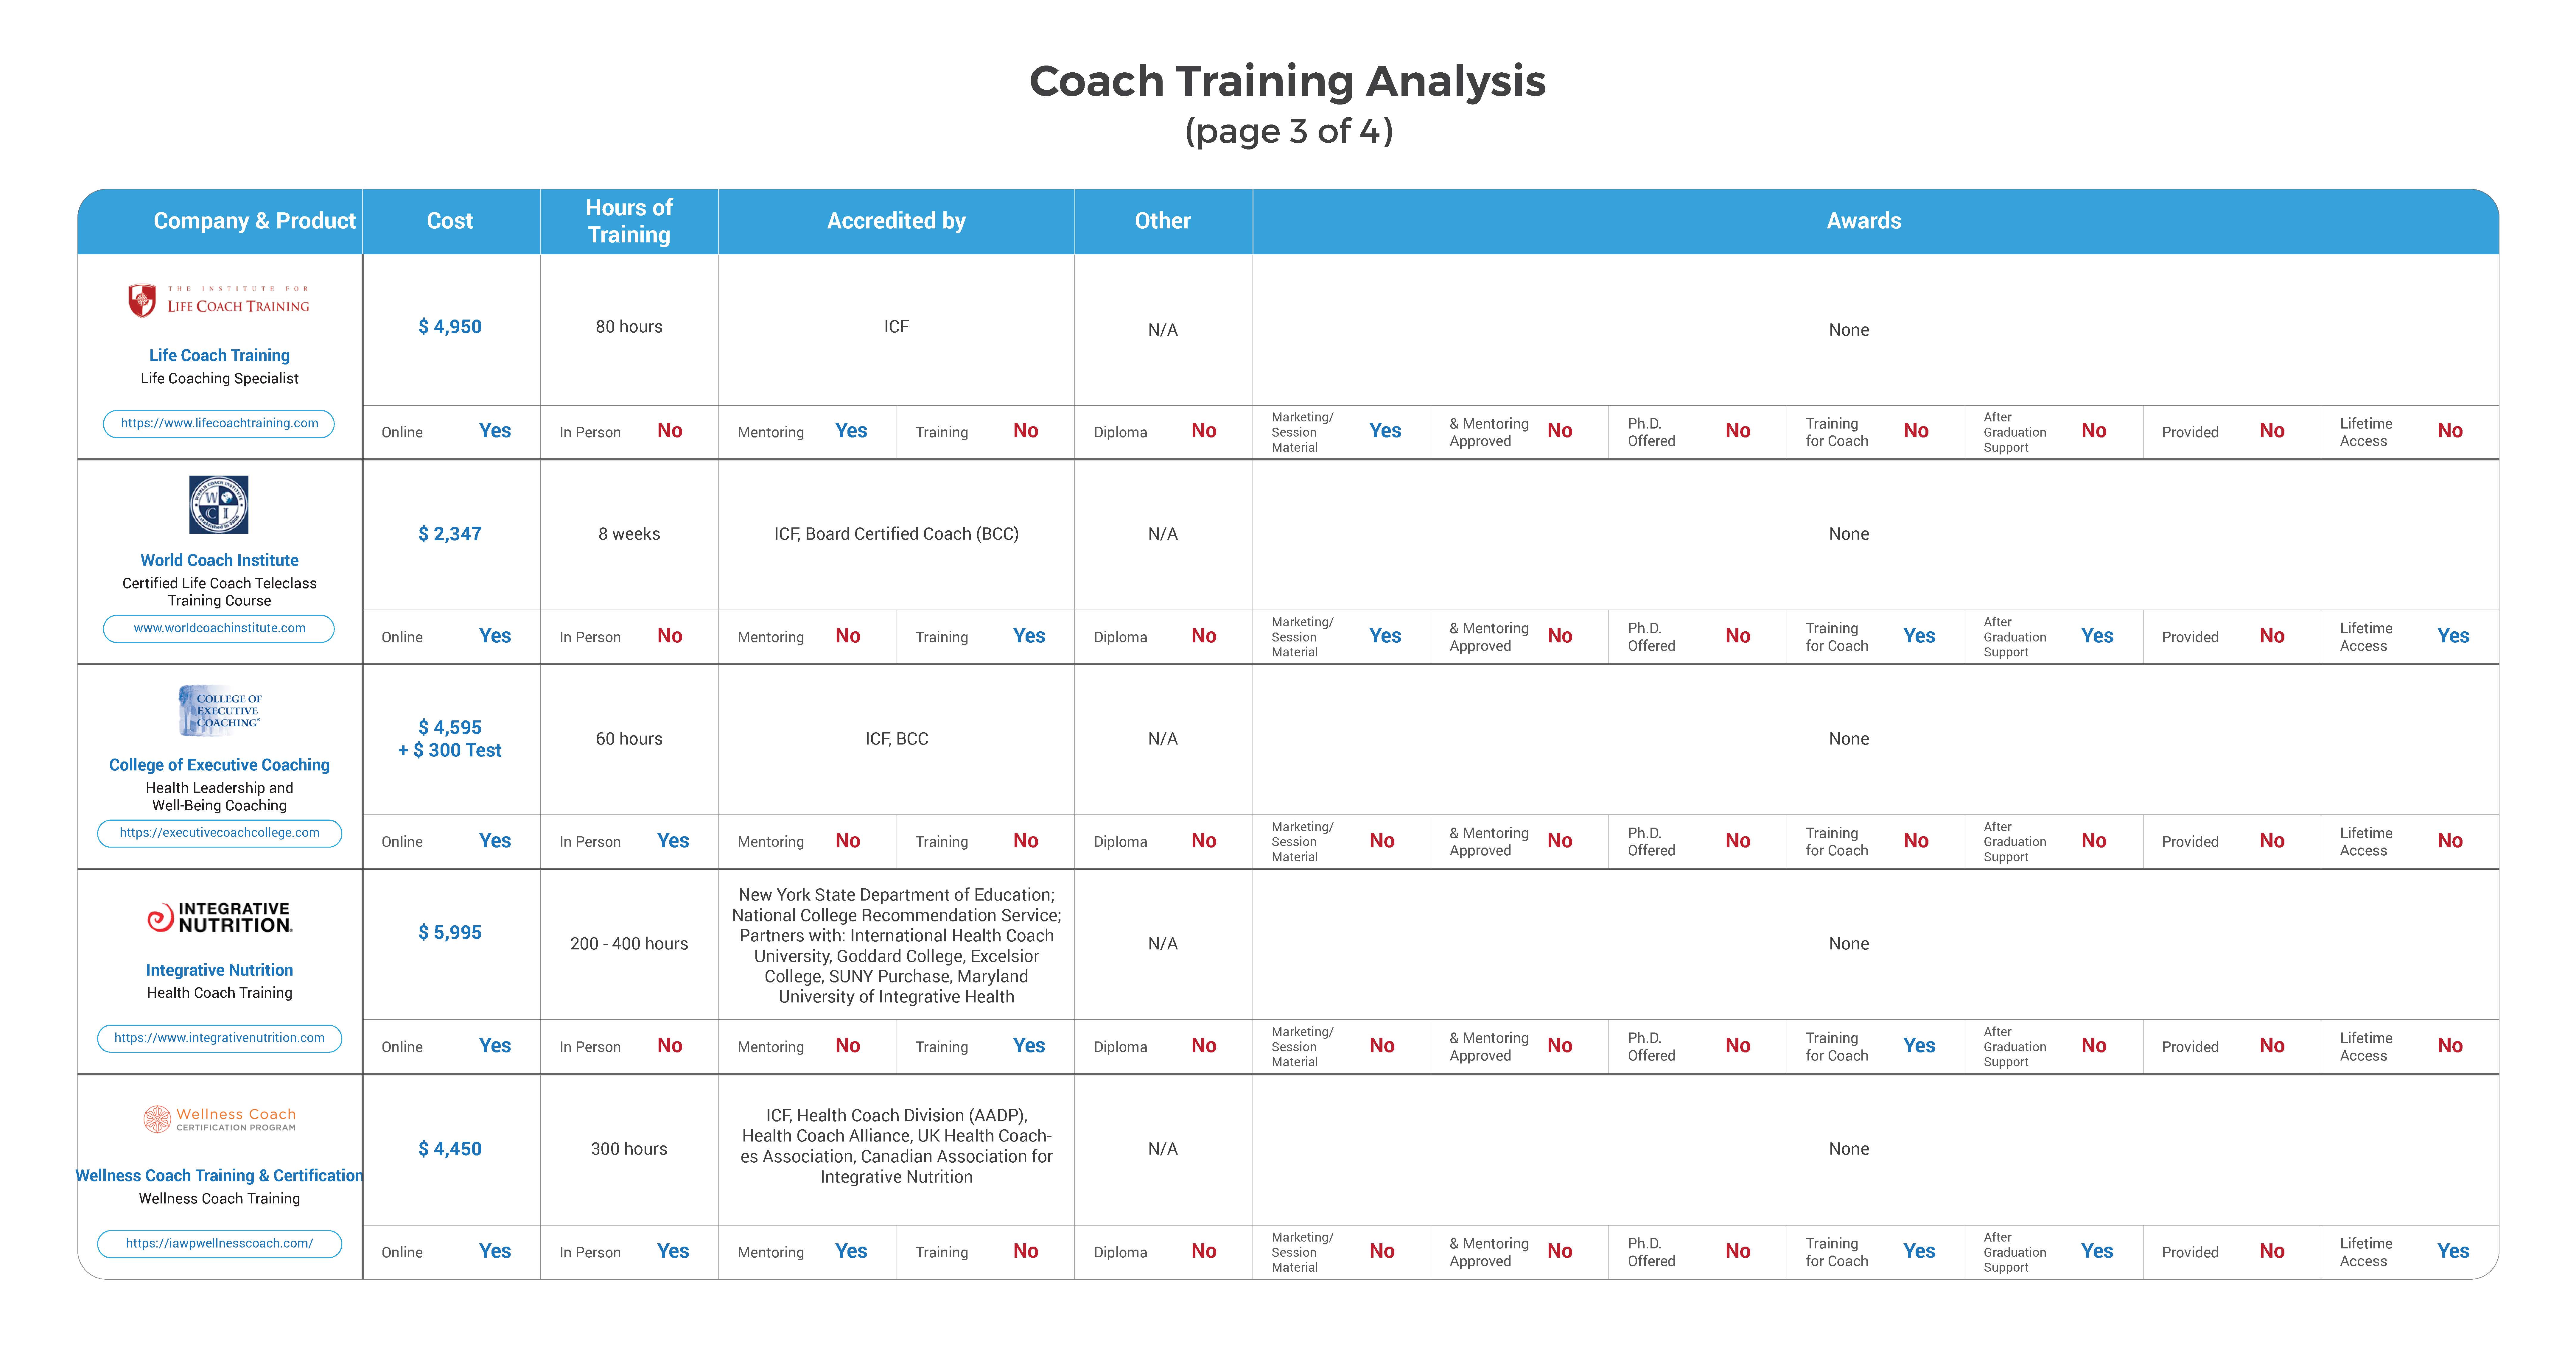 Comparison analysis of coach training courses and programs by some of the leading coaching companies